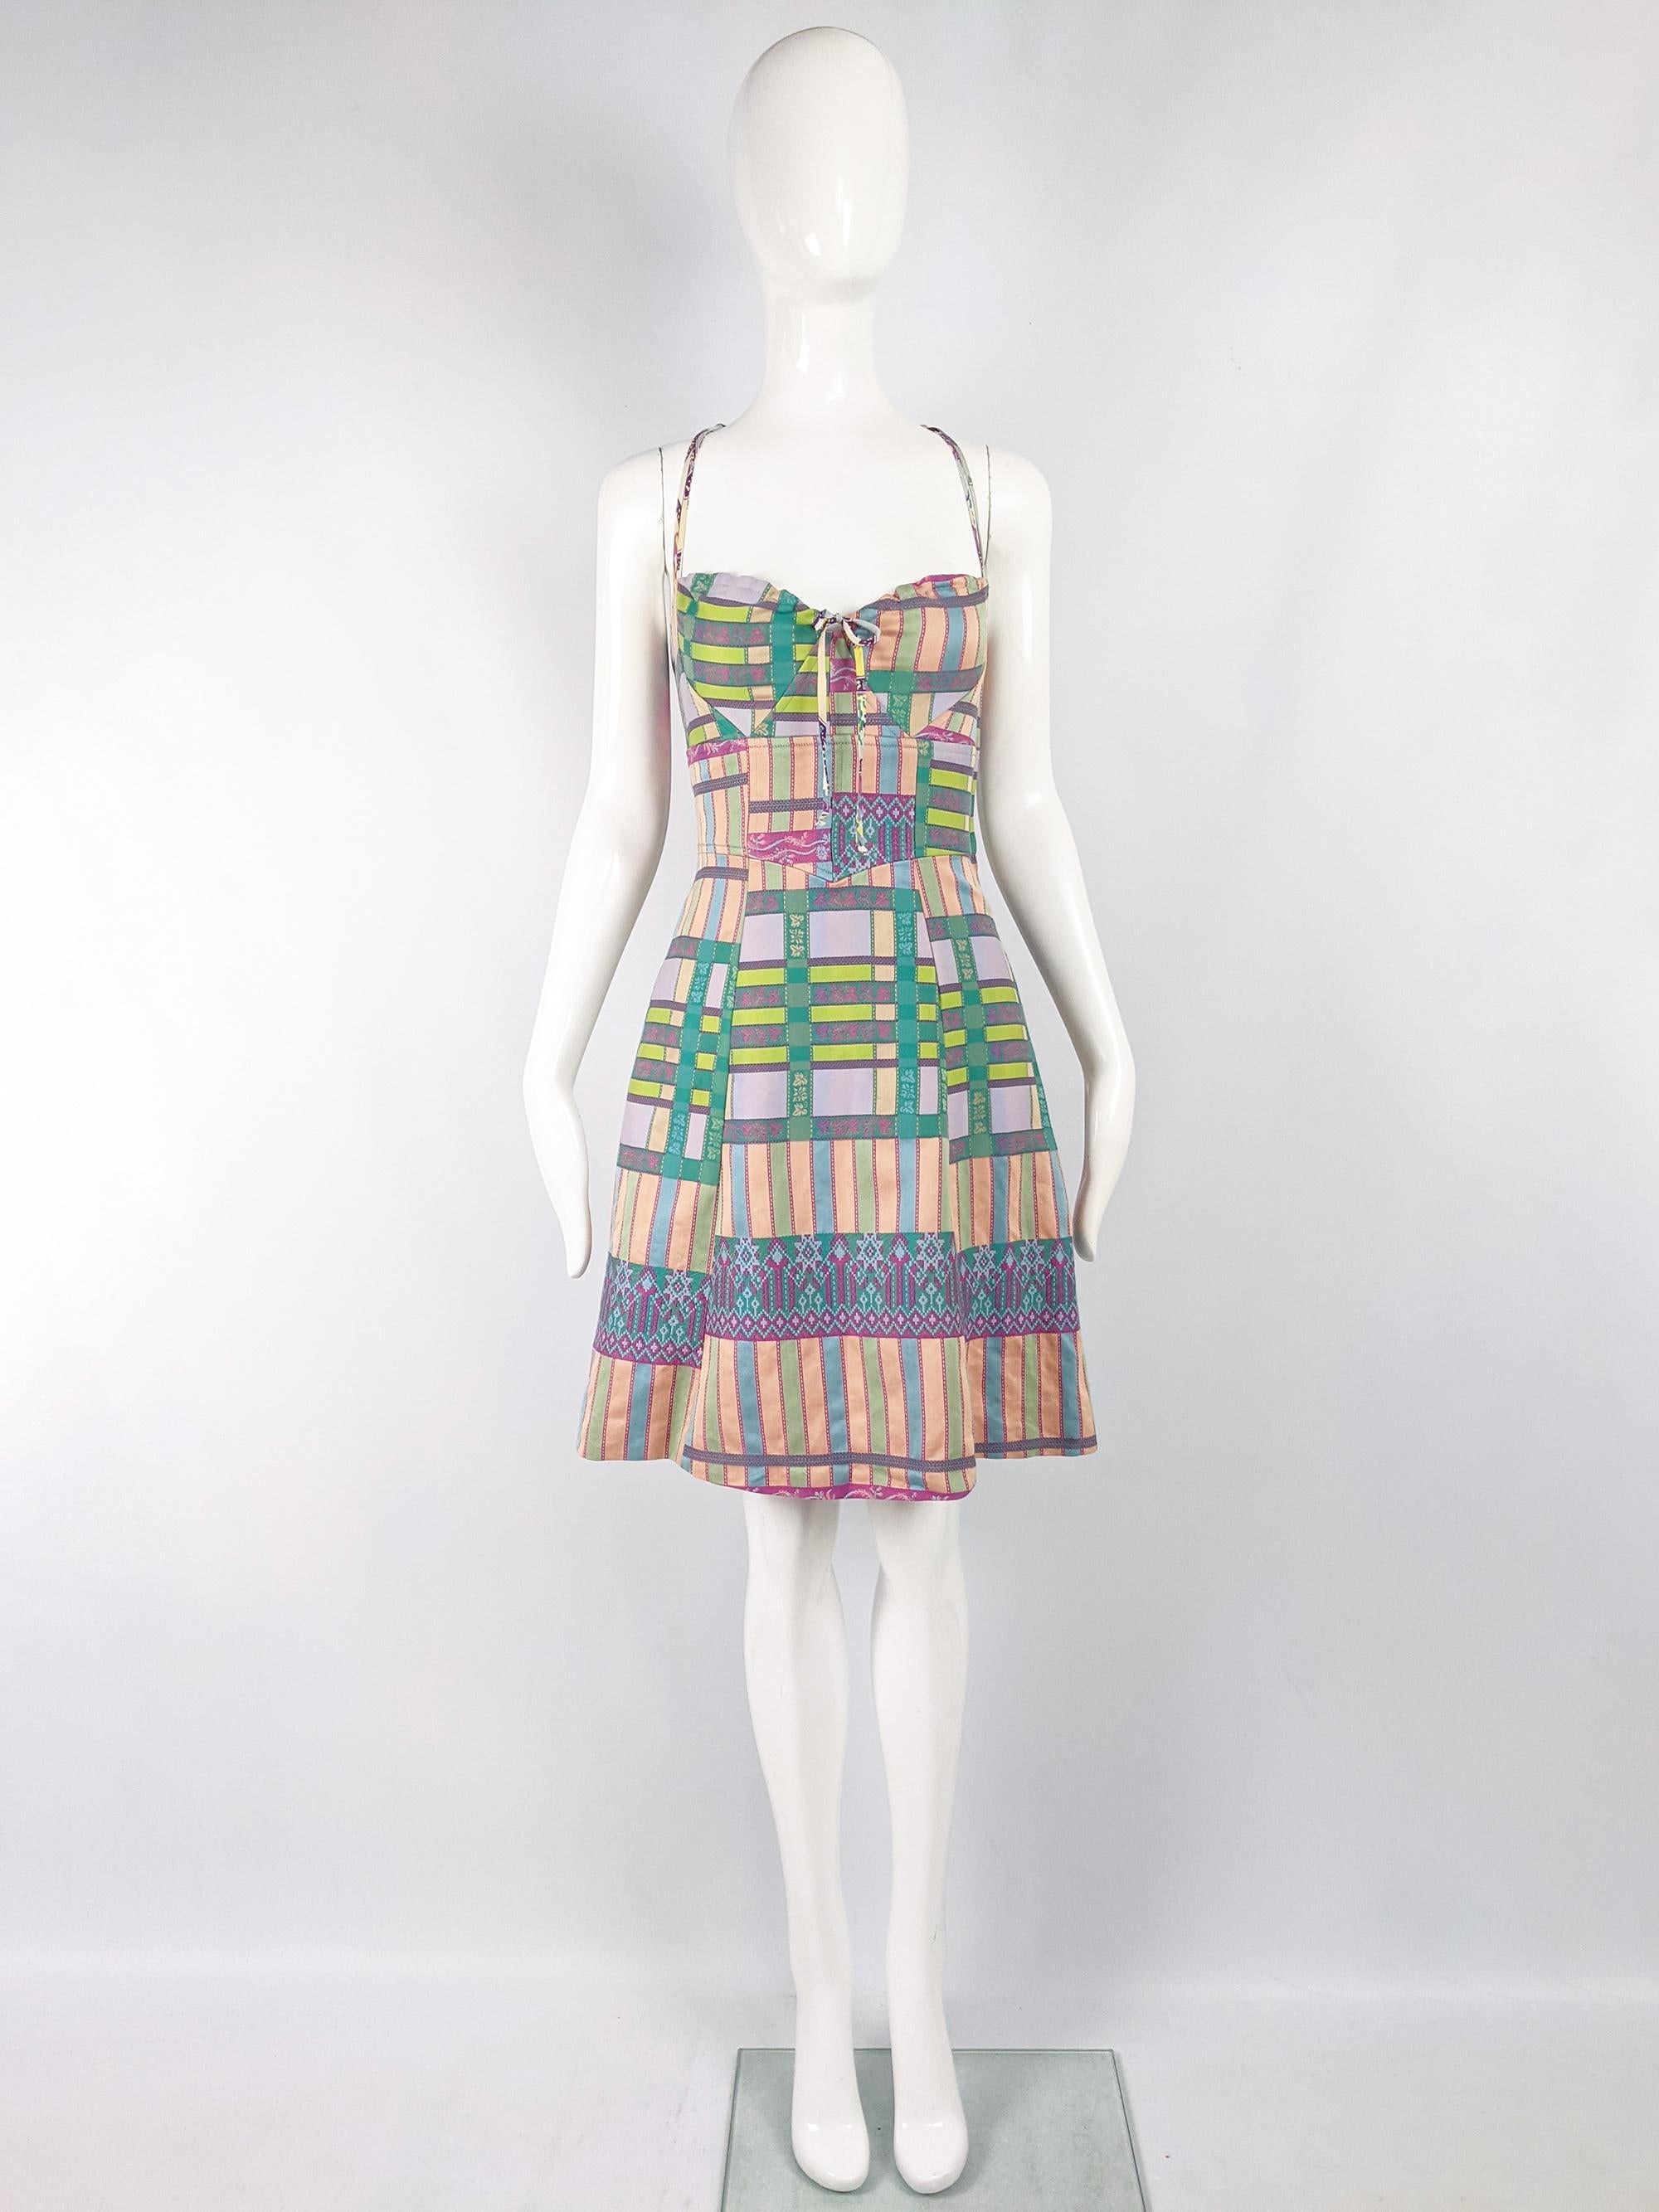 A fabulous vintage Christian Lacroix dress from the 90s. In a patterned patchwork of fabrics featuring checks, stripes and floral jacquard. It has a sexy sweetheart neckline with a double spaghetti strap detail and racer back. Perfect for a party or